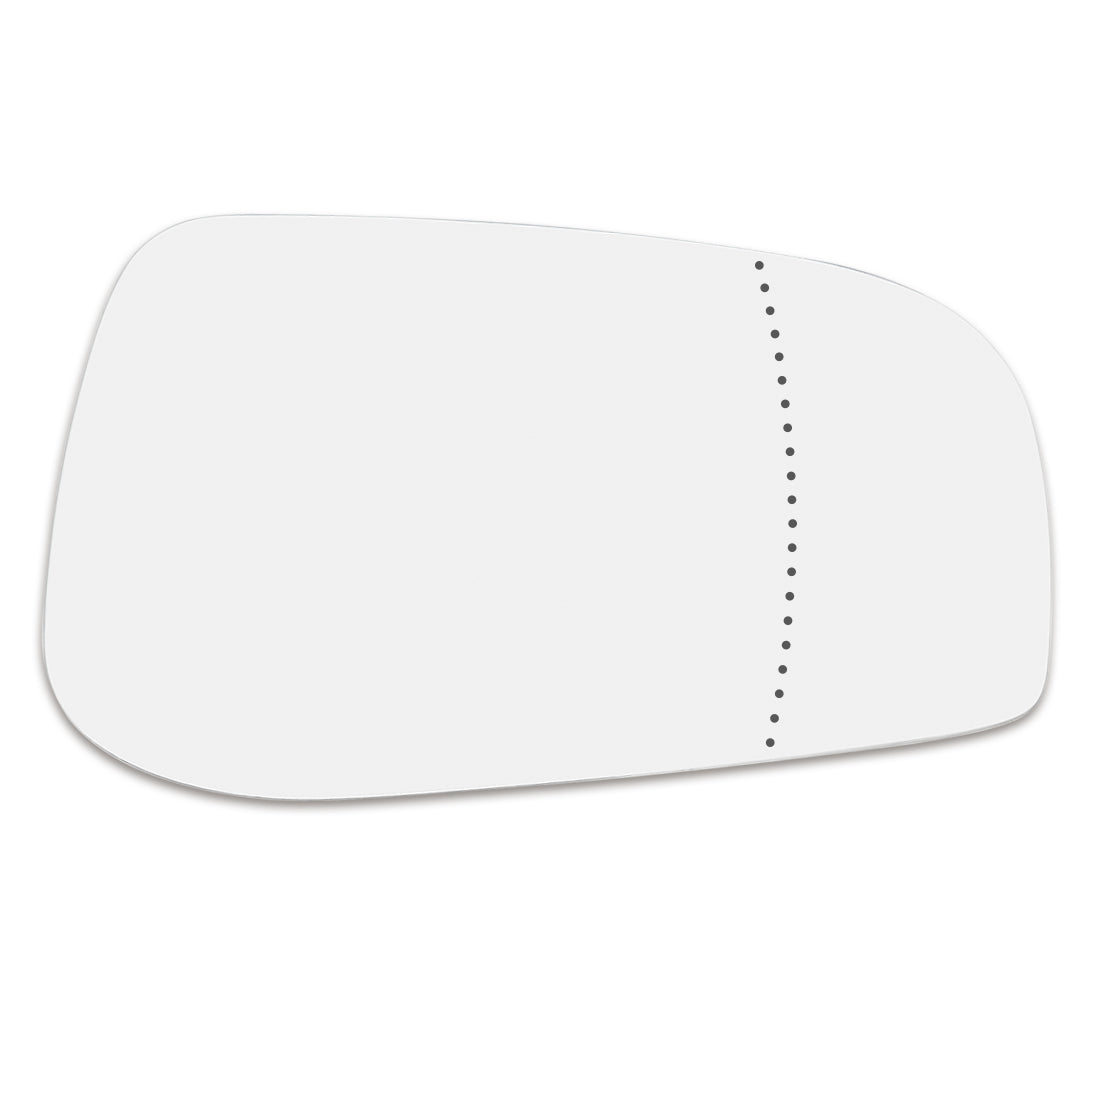 X AUTOHAUX Passenger Right Side Rearview Replacement Mirror Glass W/ Adhesive for VOLVO S60 S80 V70 2001-2006